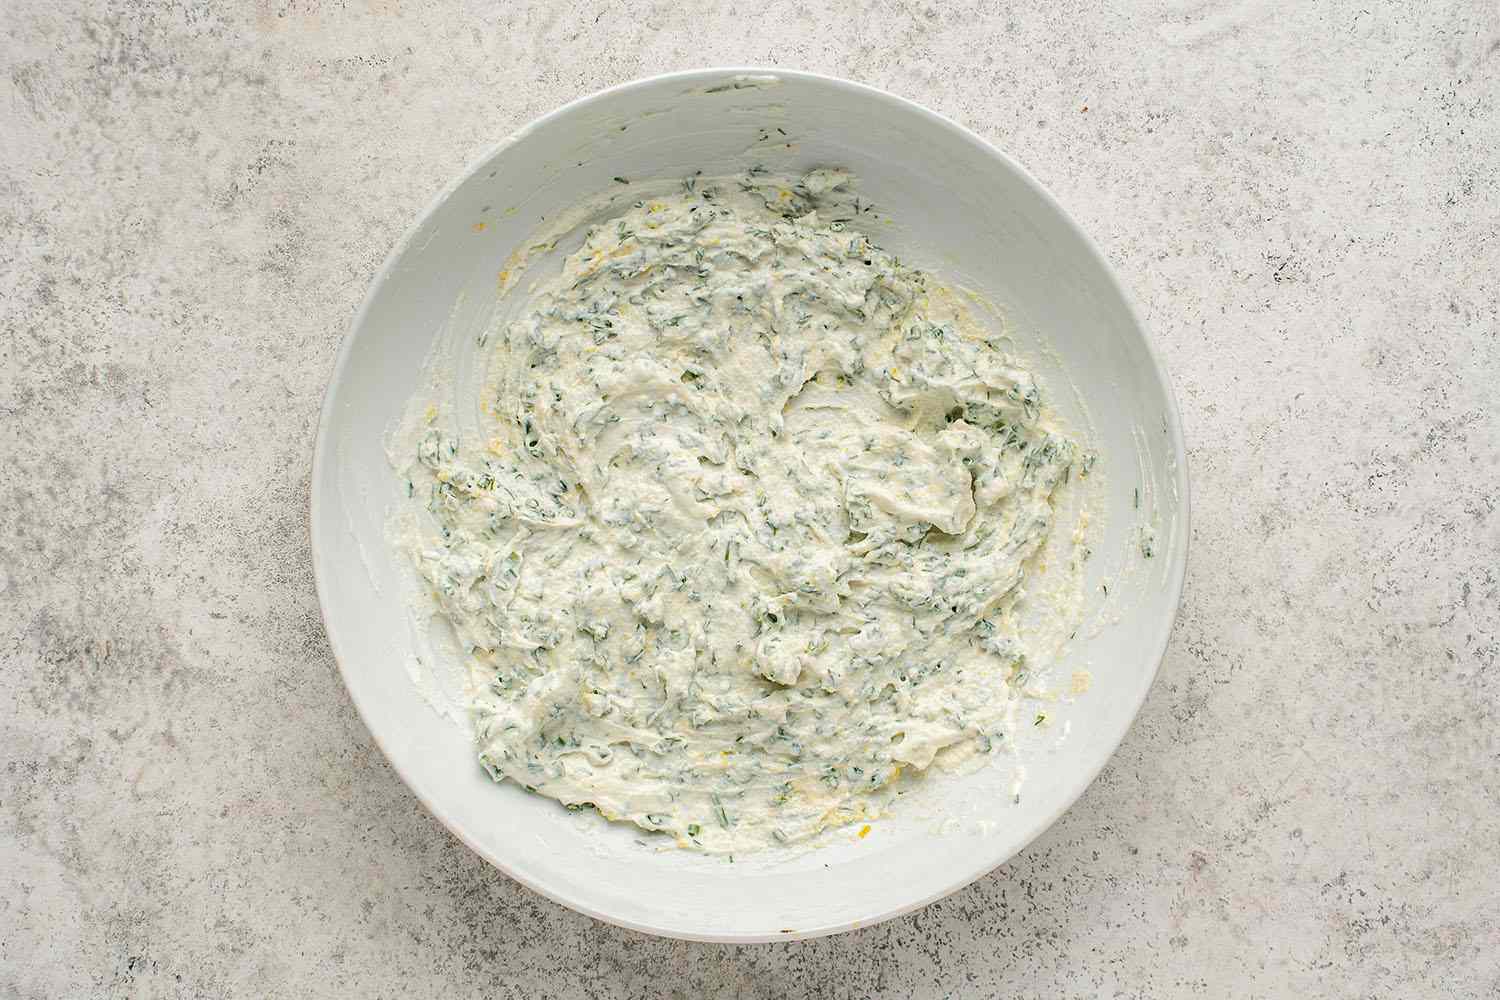 Lemon zest, sour cream, chives, dill, and onion powder in a bowl 